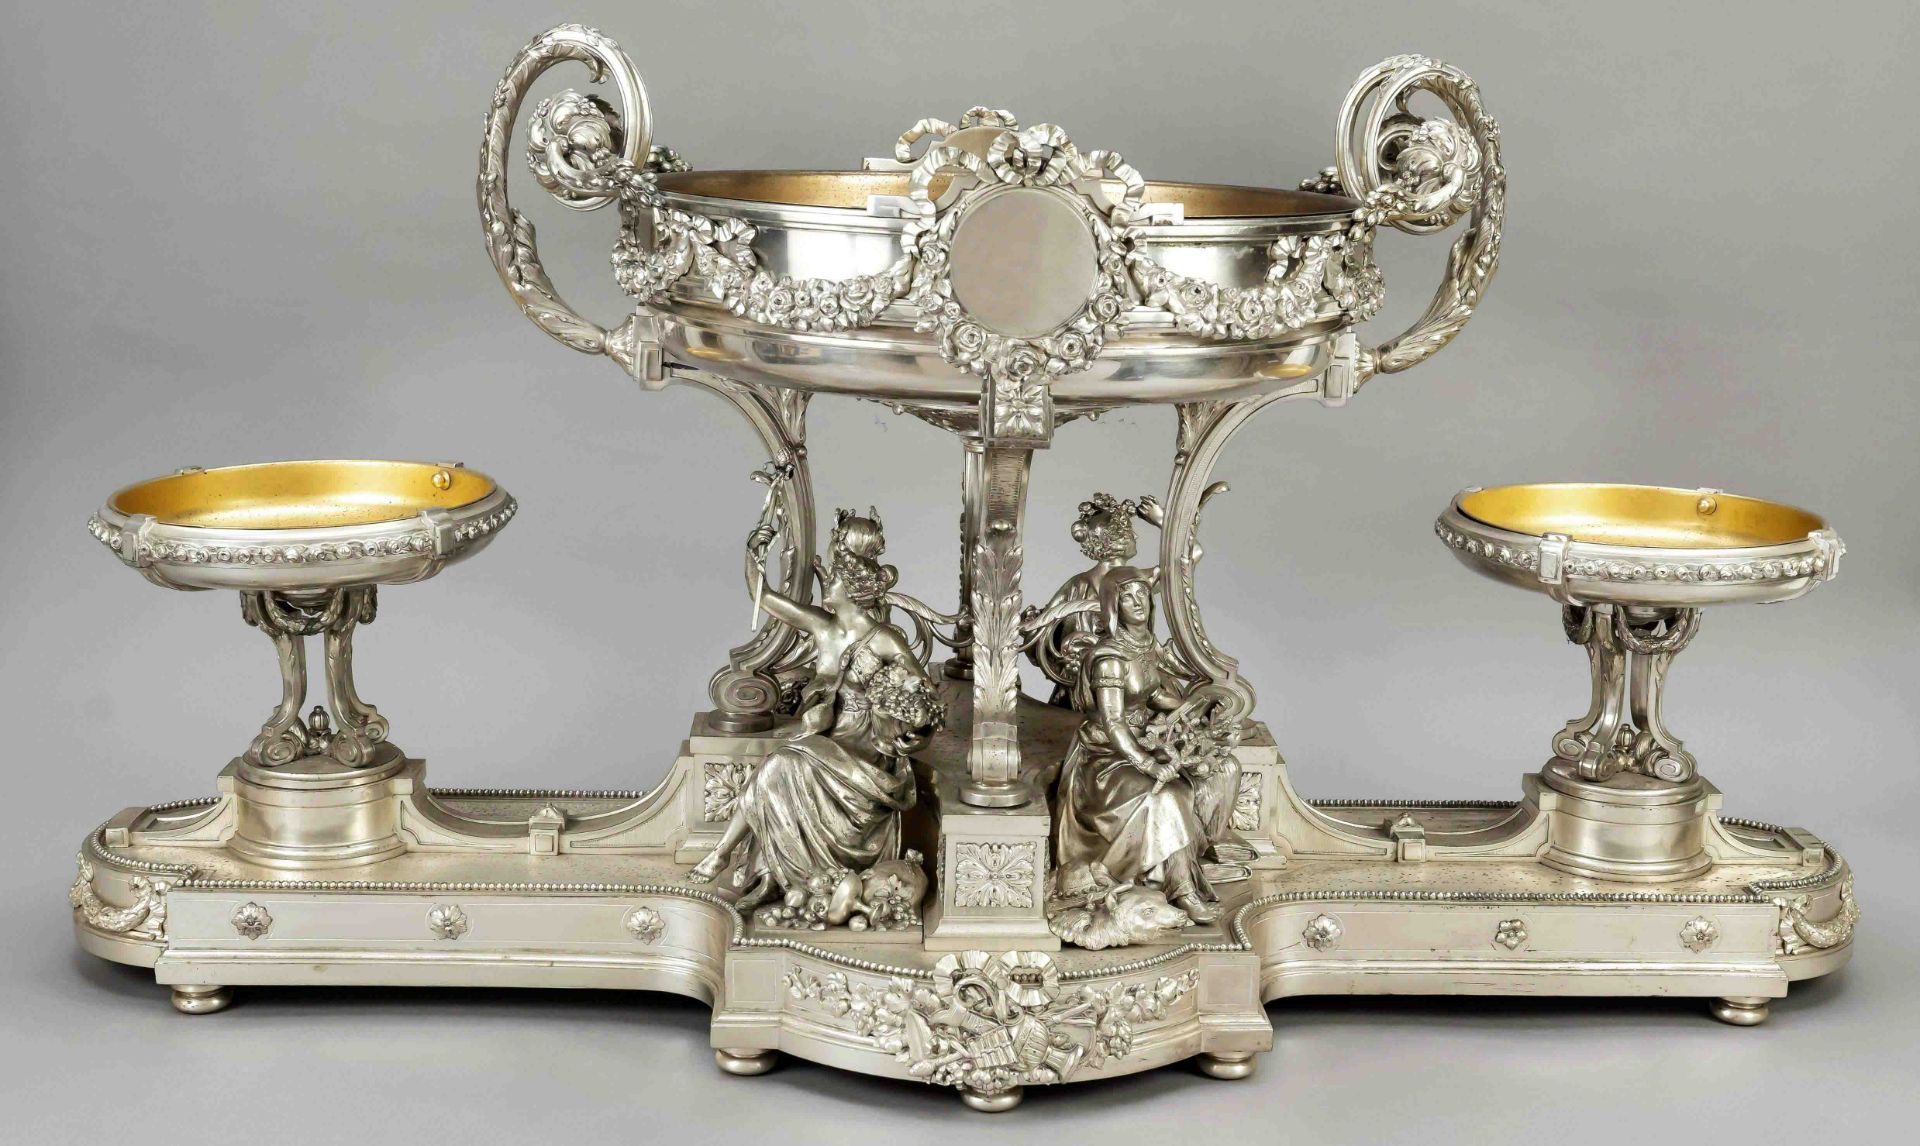 Very large centerpiece, German, circa 1900, maker's mark Sy & Wagner, Berlin, silver 800/000,